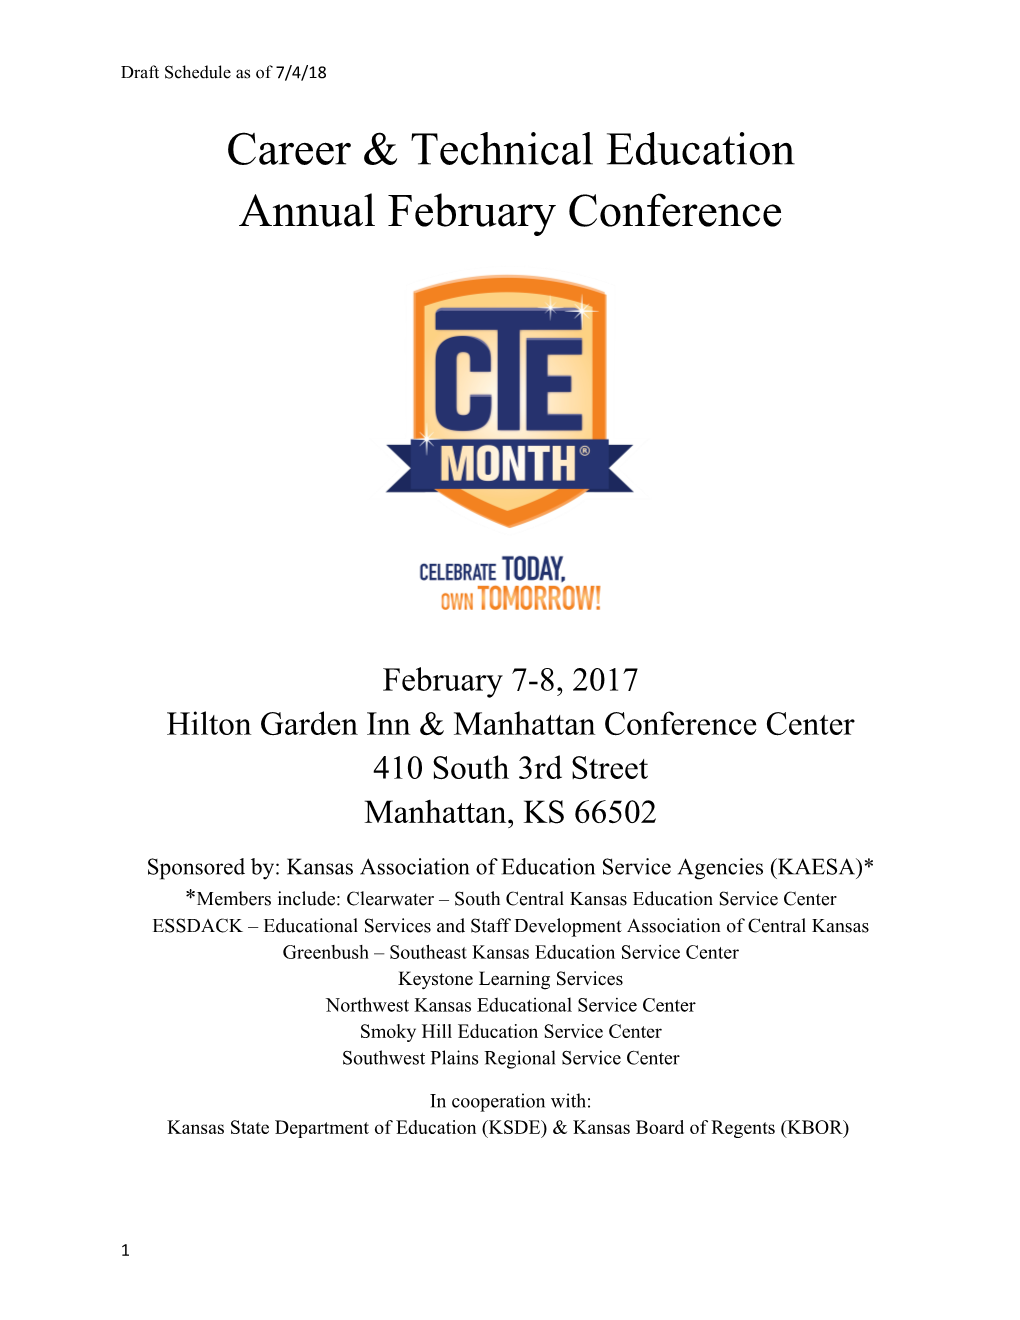 Career & Technical Education Annual February Conference s2